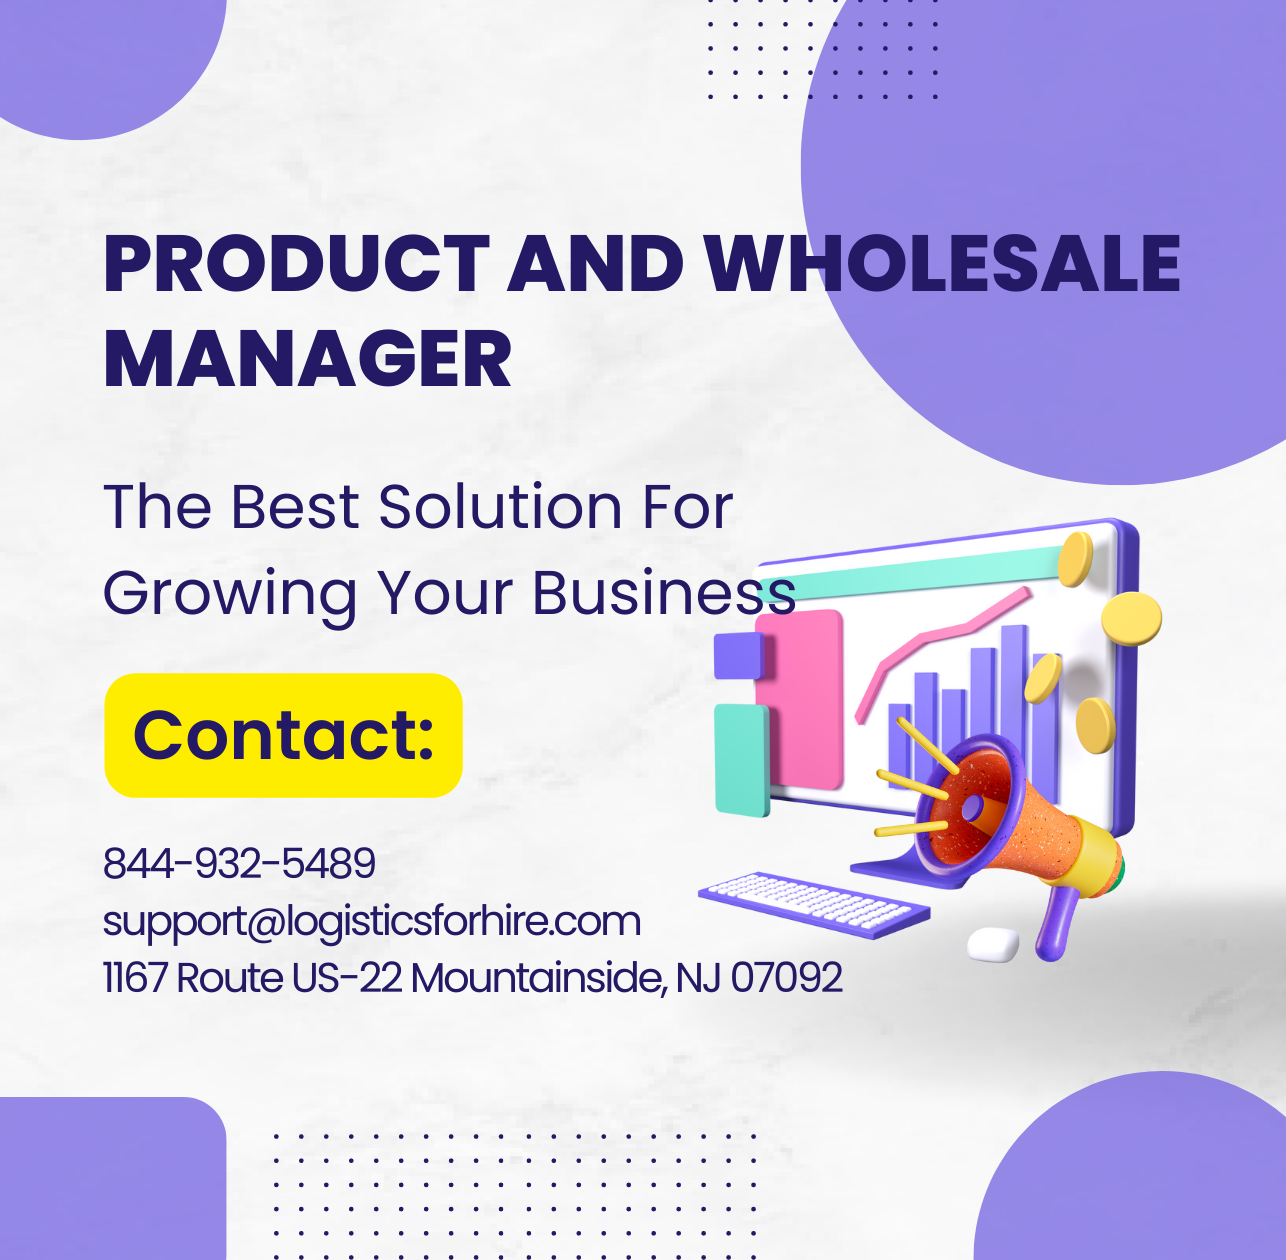 Product and Wholesale Manager V2.0.6